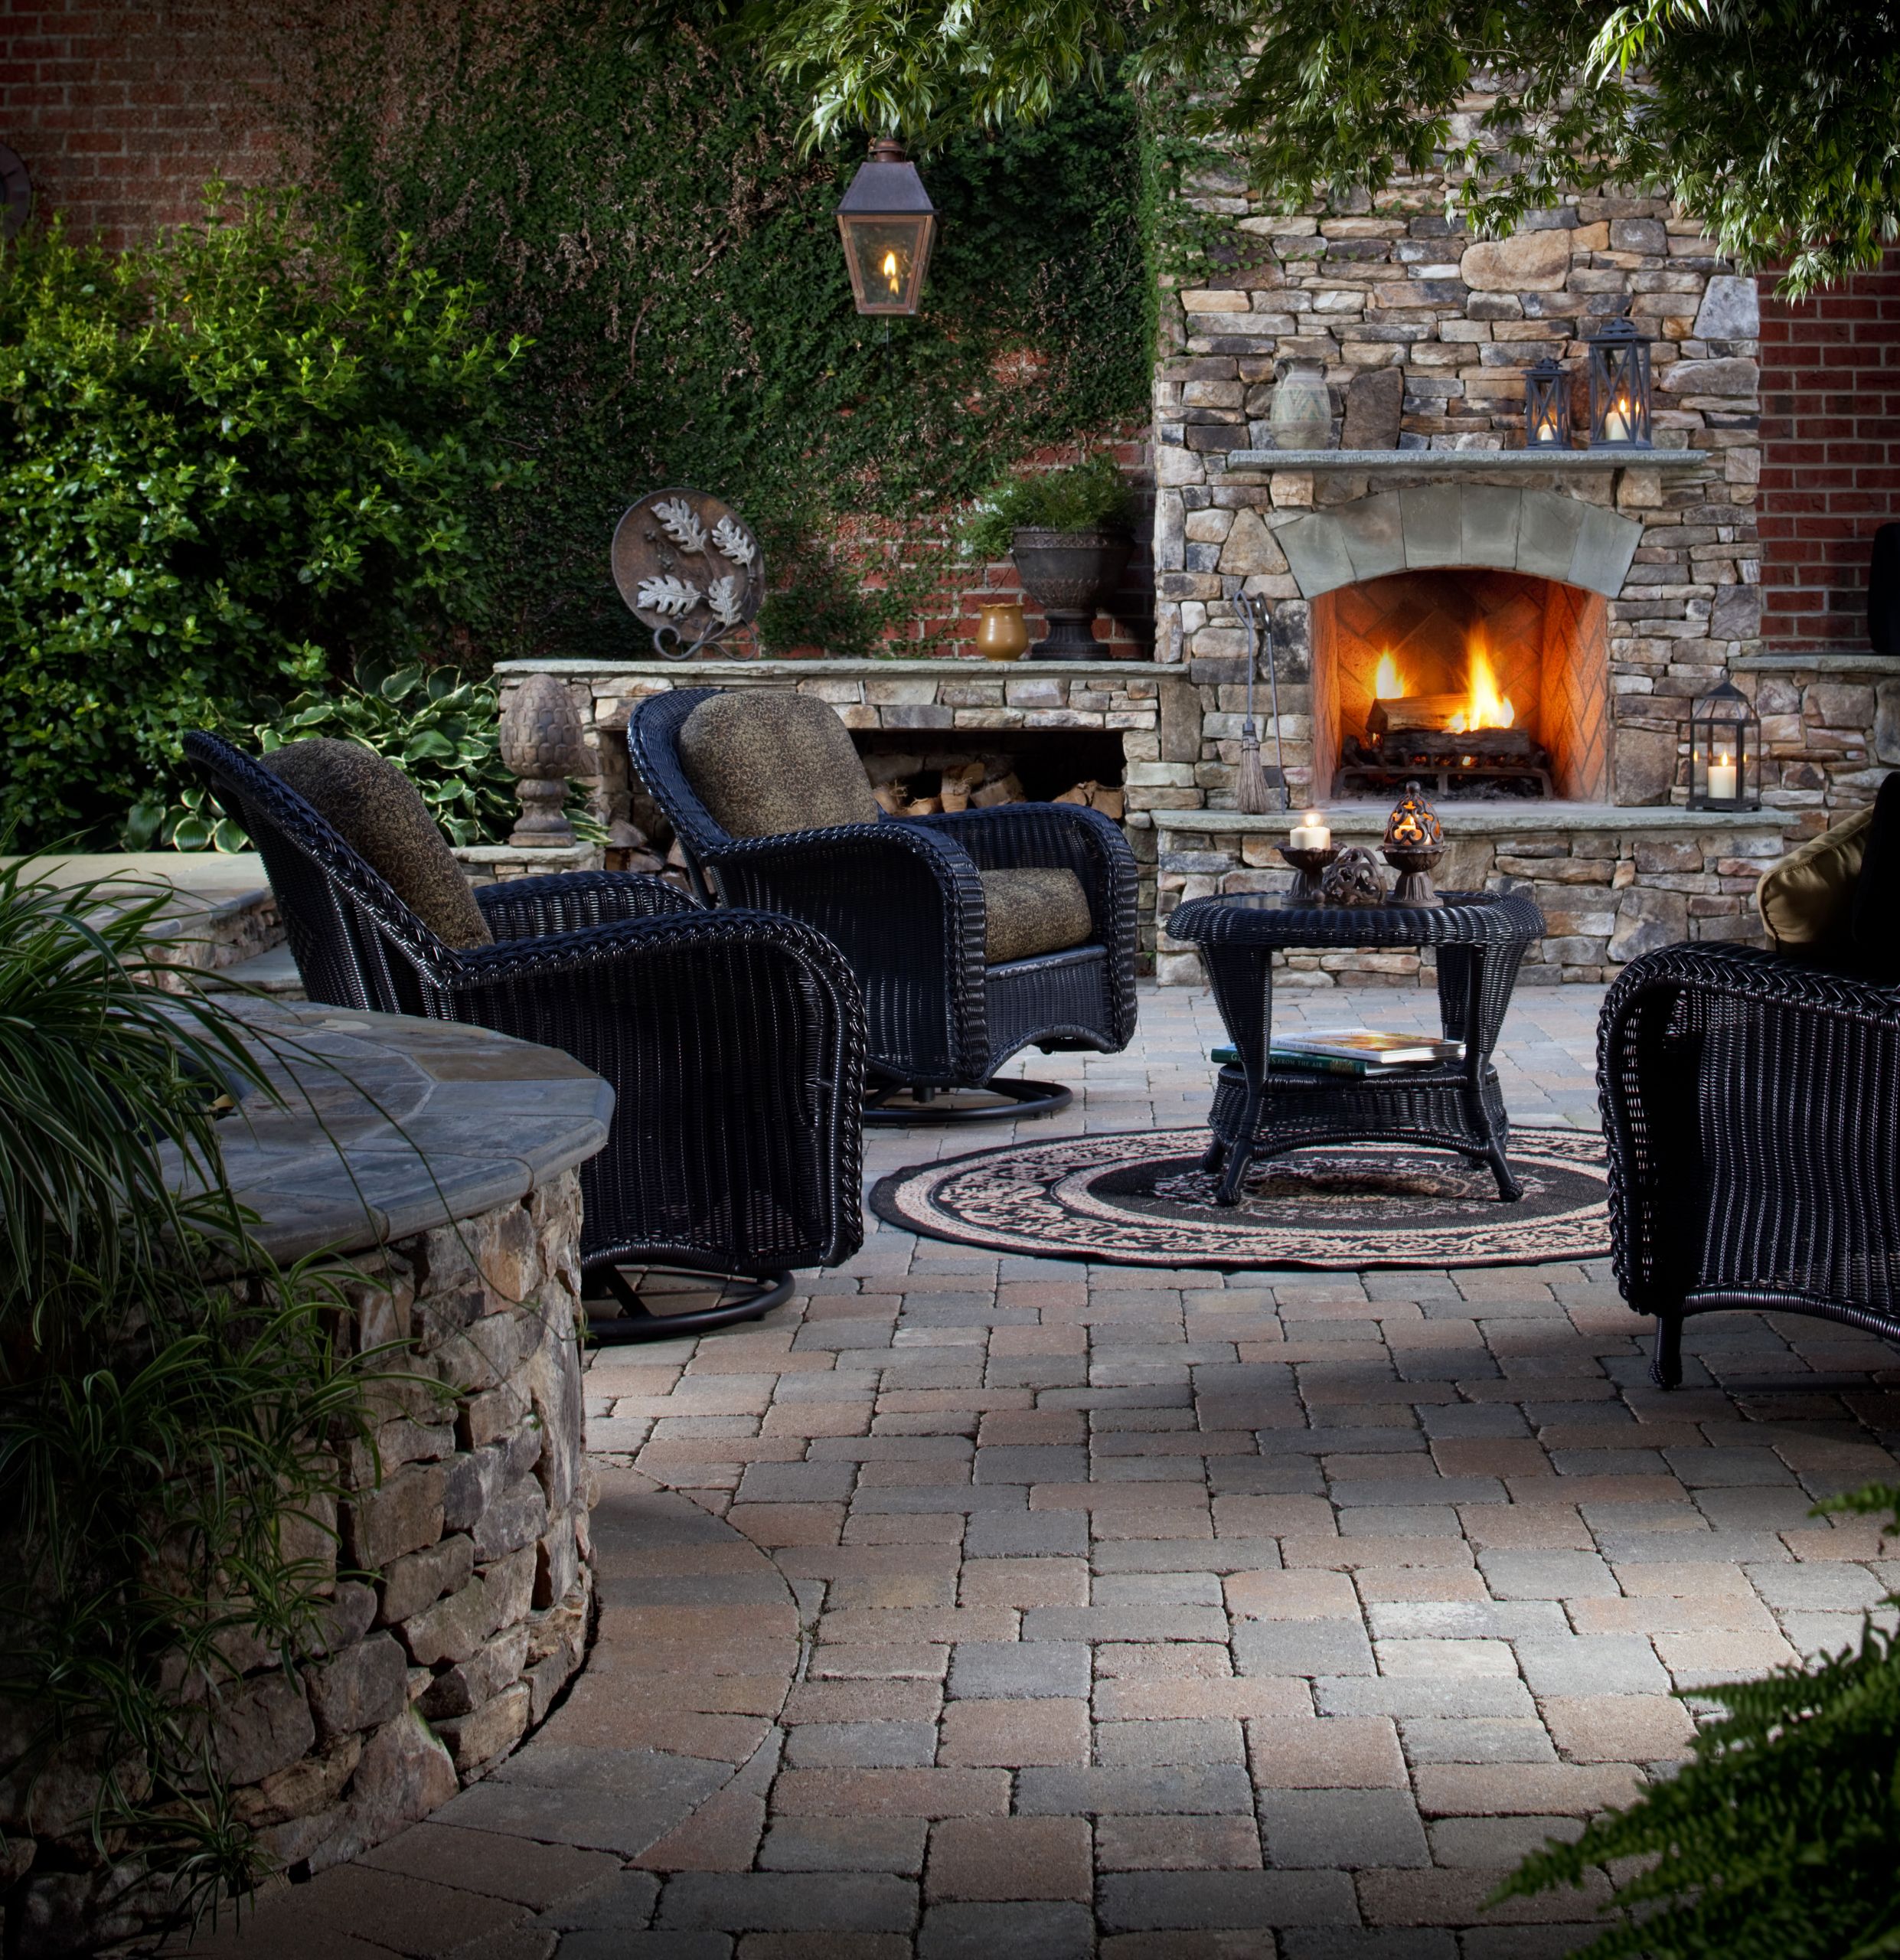 Outdoor Fireplace Or Fire Pit
 Year round Ideas for Outdoor Fireplaces and Fire Pits